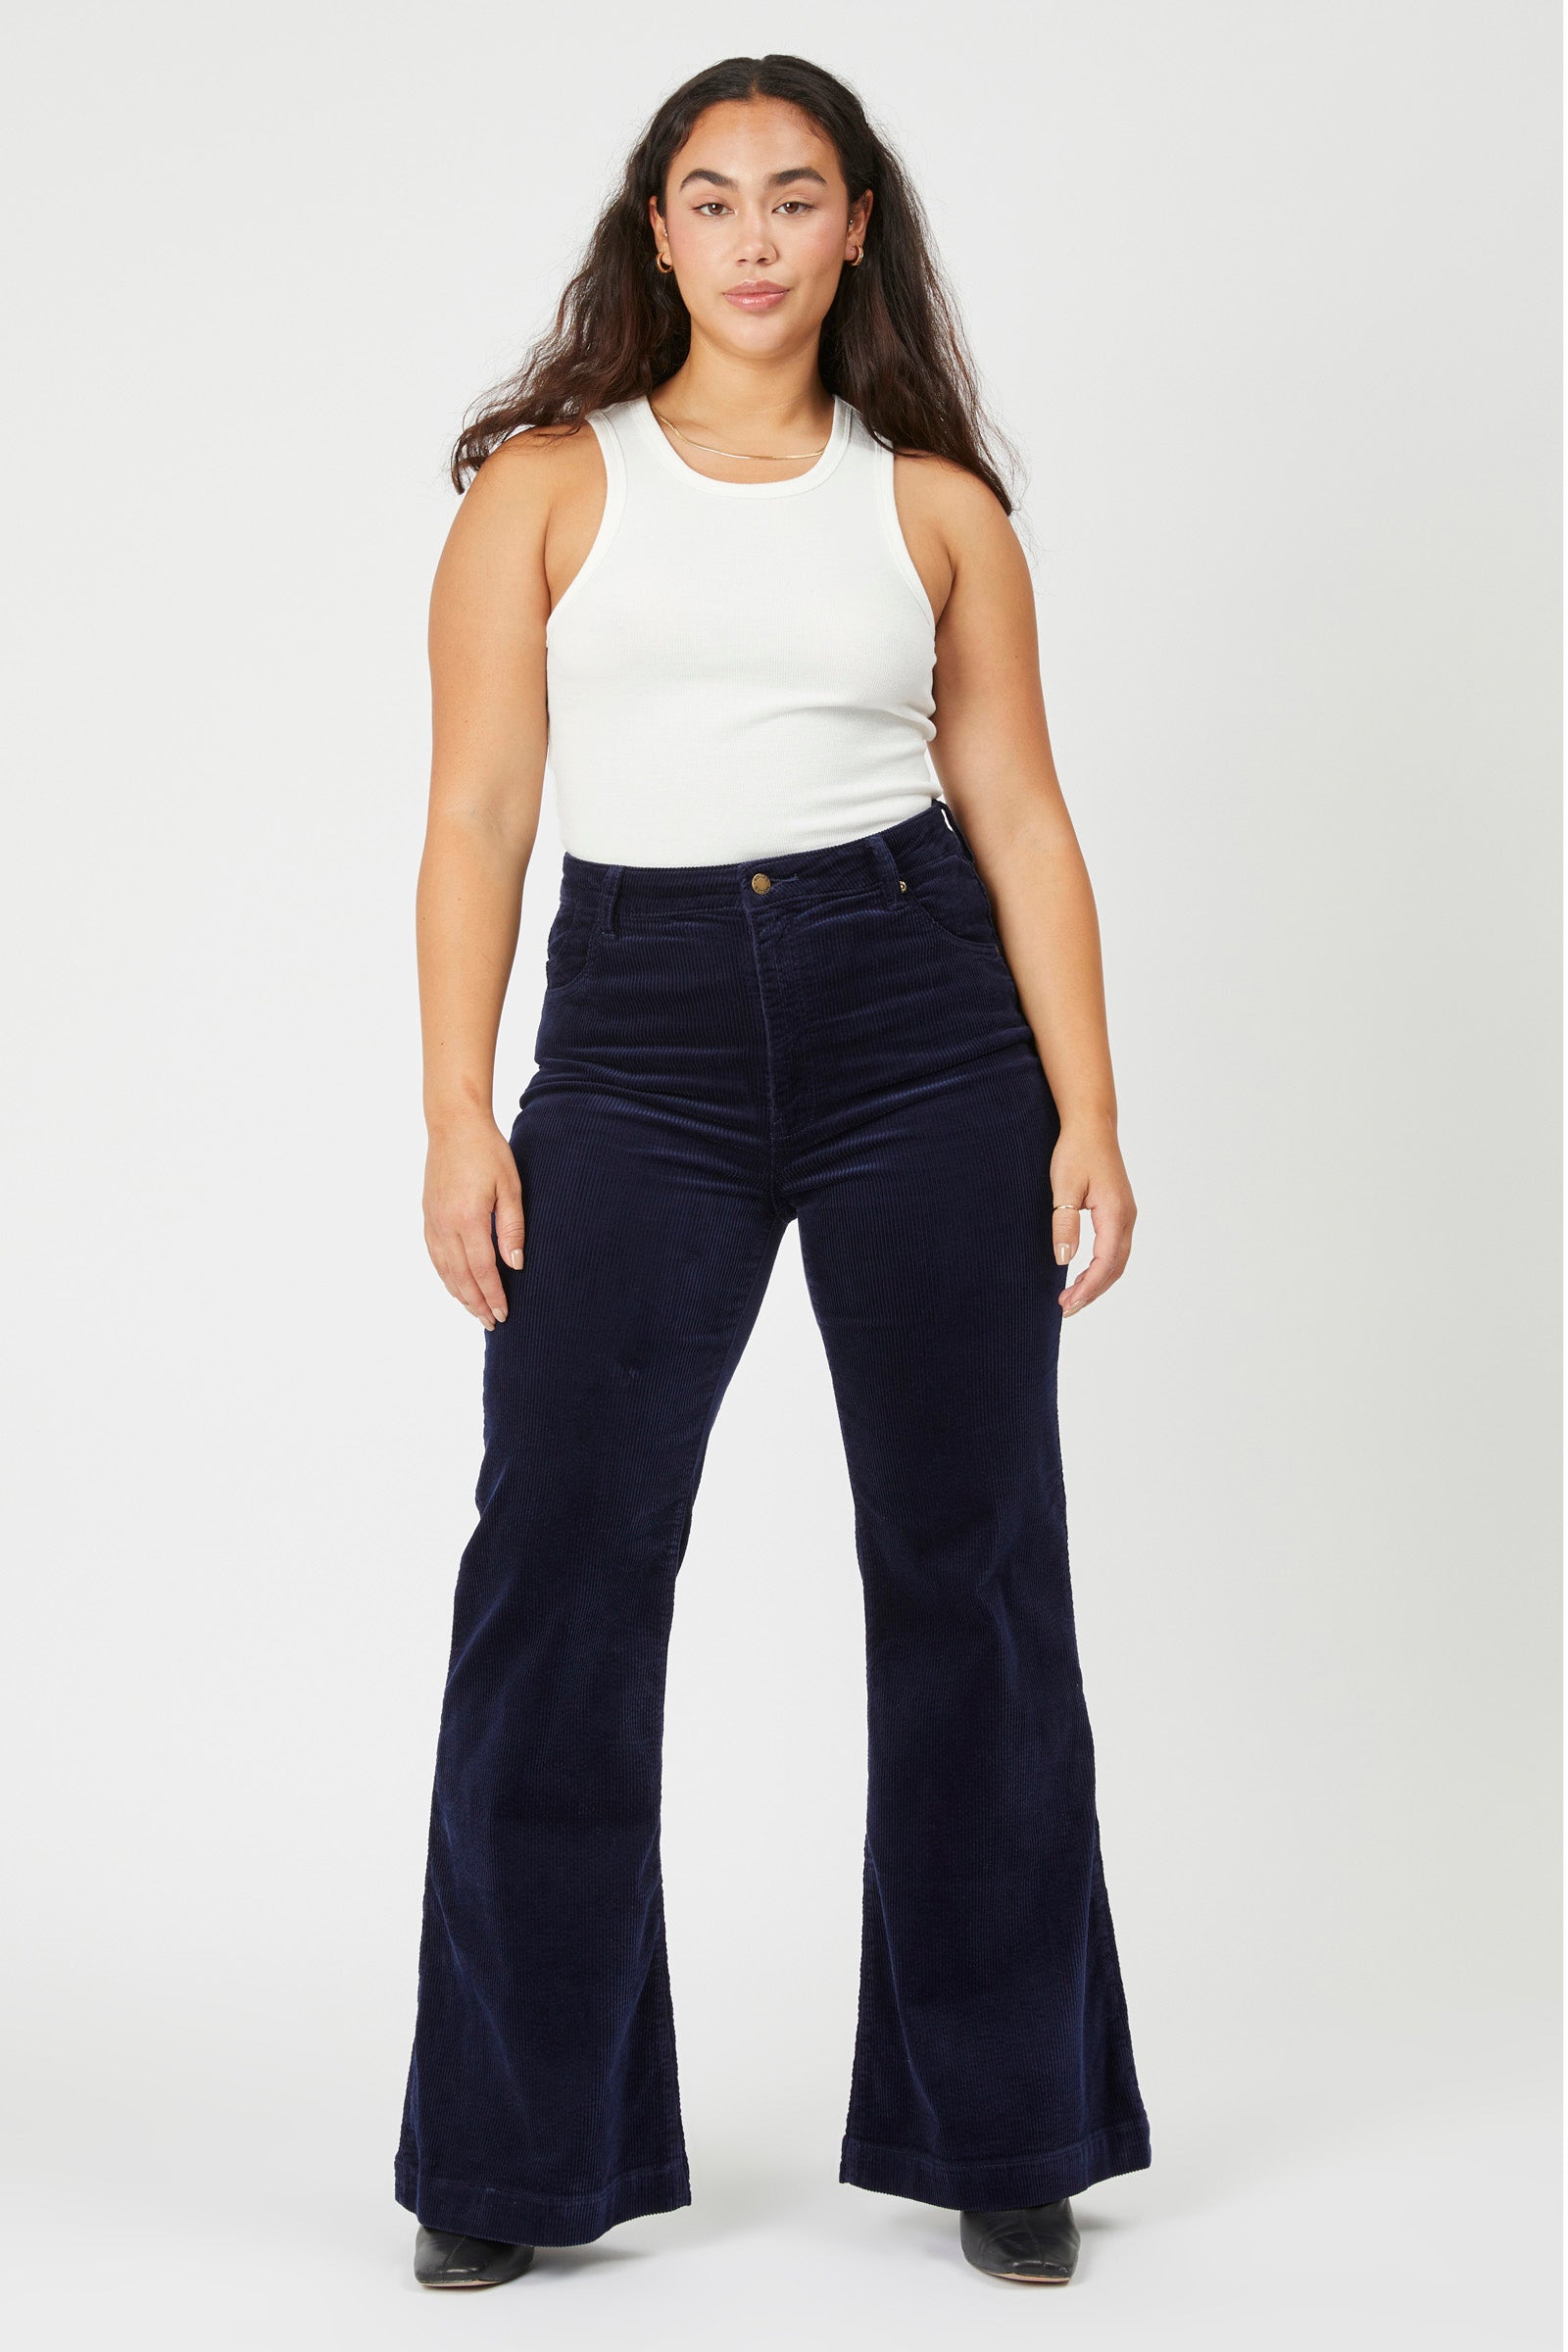 Rolla's East Coast Cord Flare Jeans